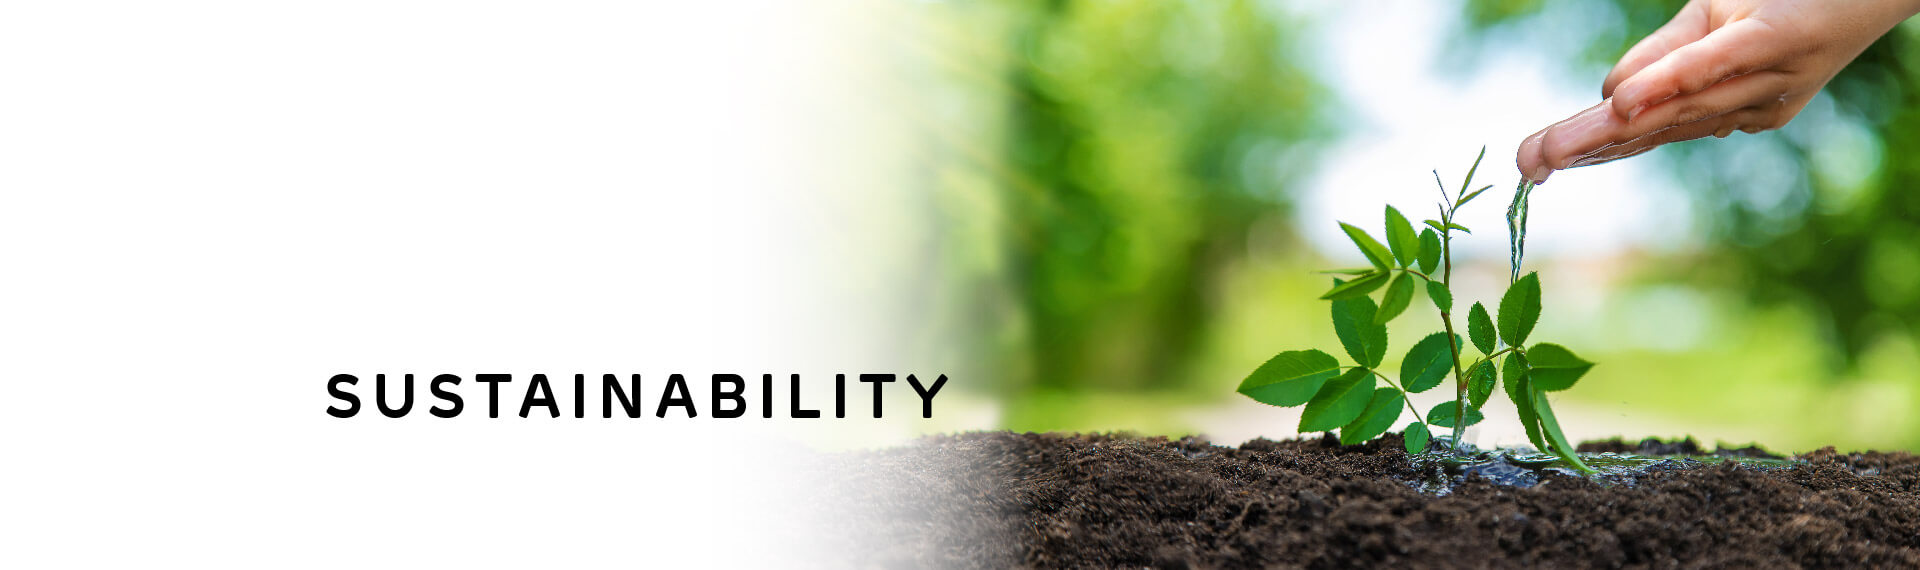 Header image with “Sustainability” in capital letters; with a photo of a person’s hand gently running water onto a green sapling plant.